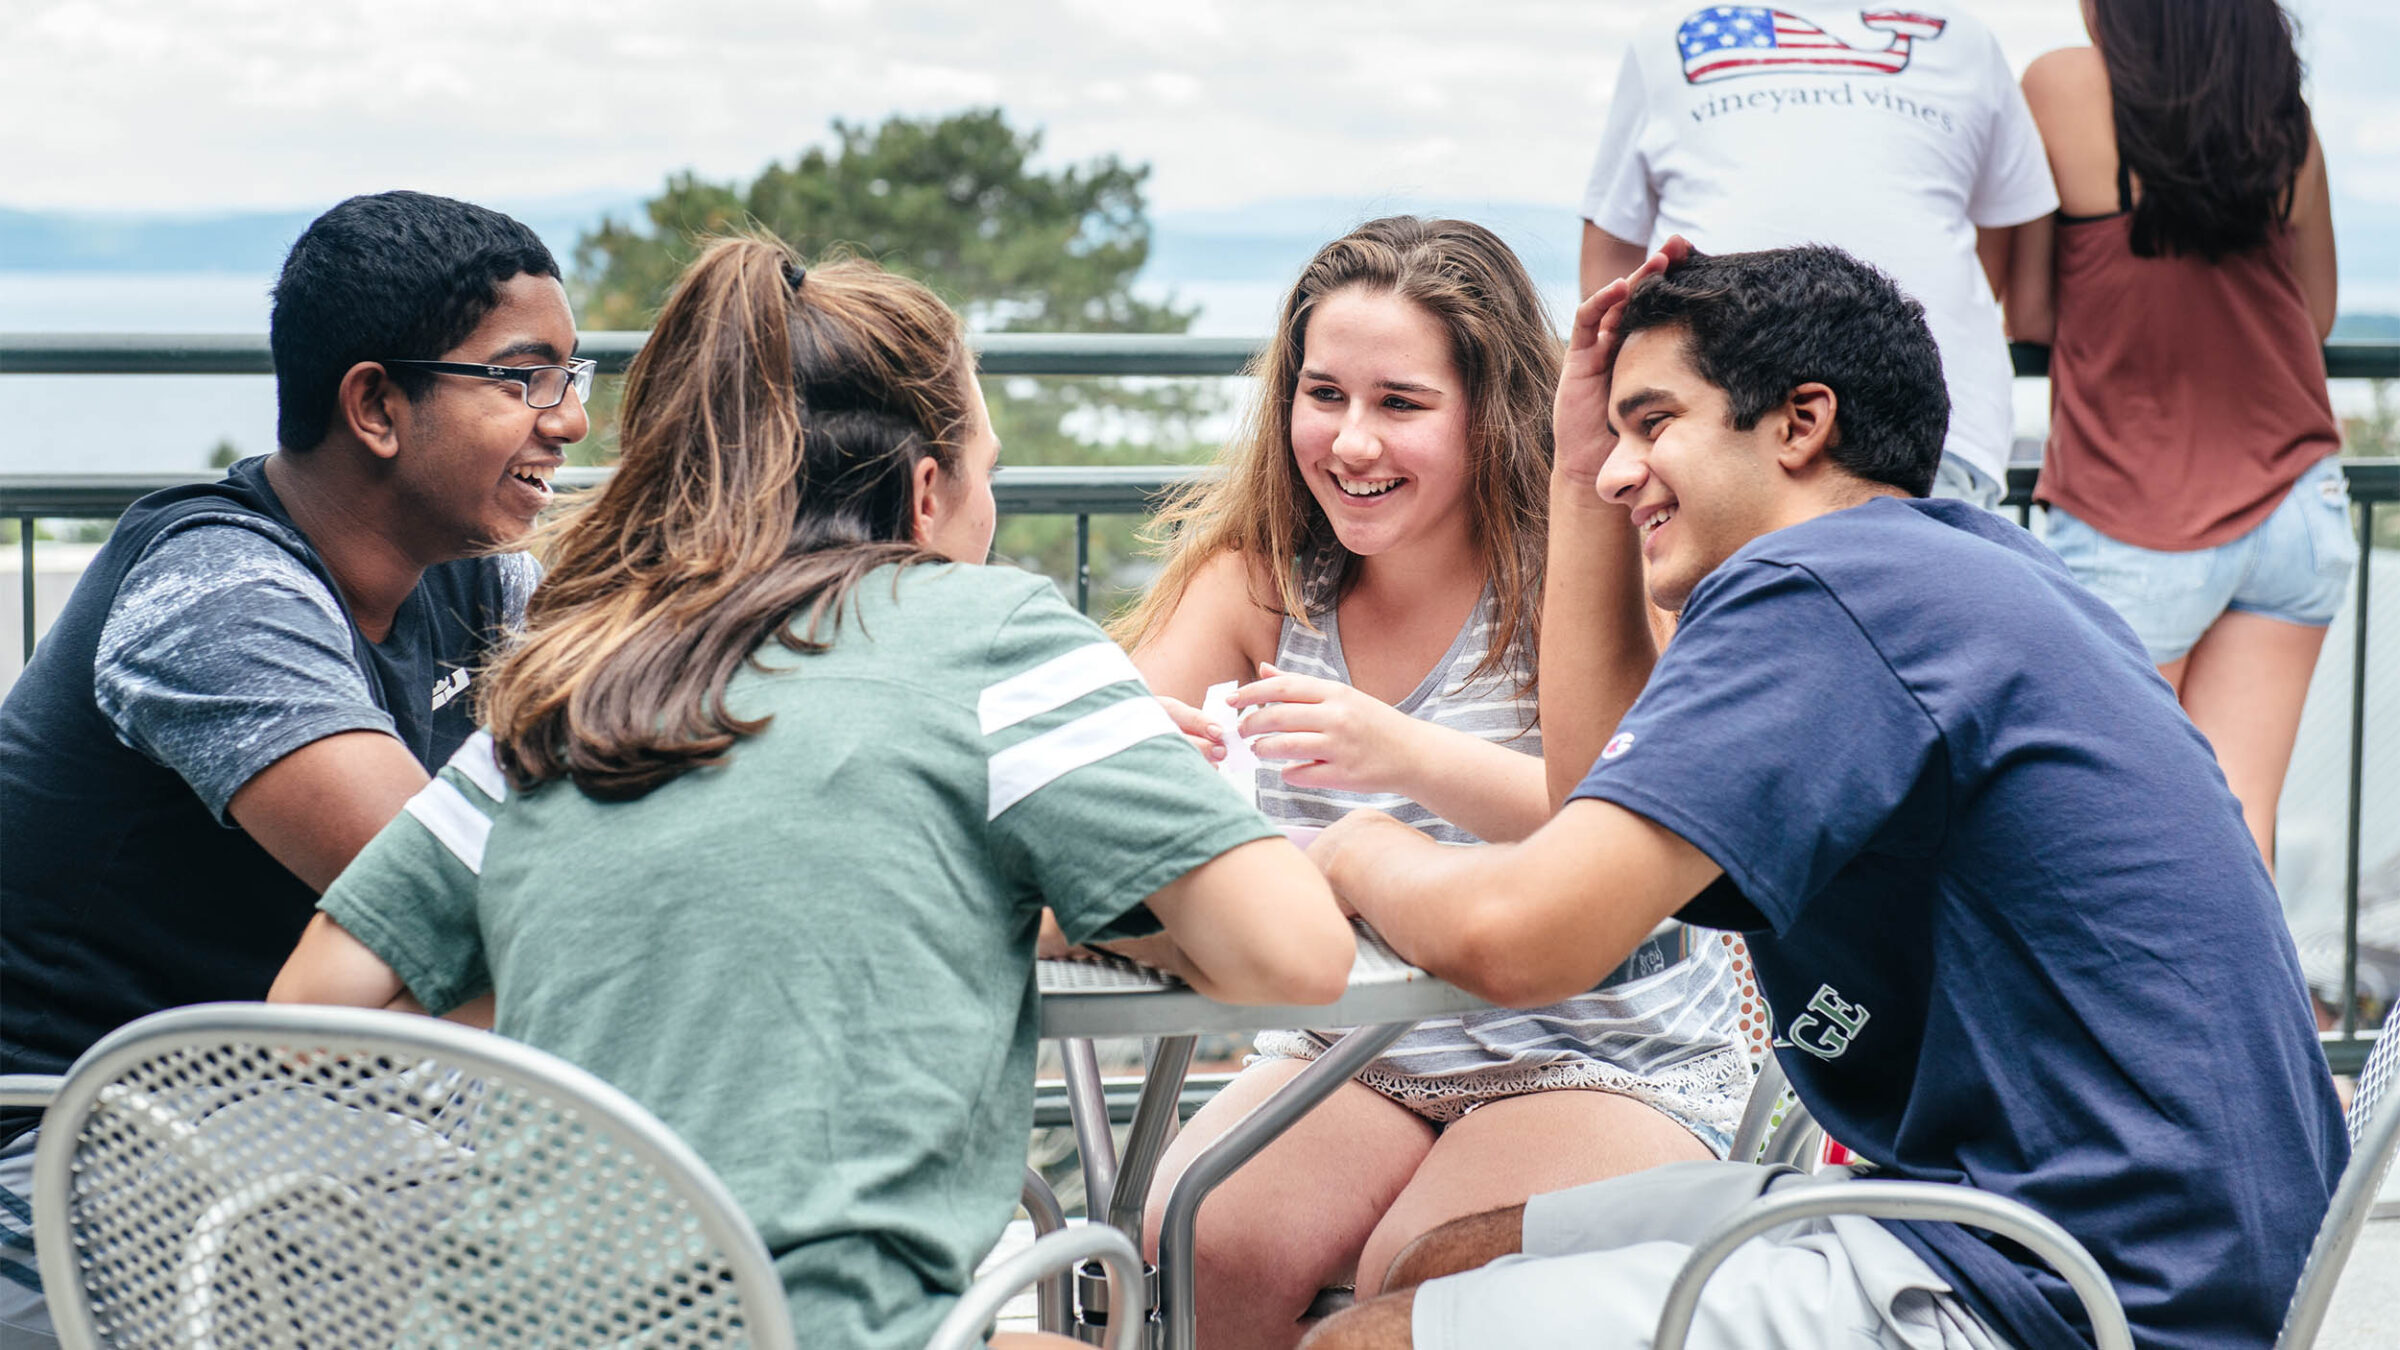 four smiling students sharing a conversation on an outdoor patio while two other students observe the view across the lake